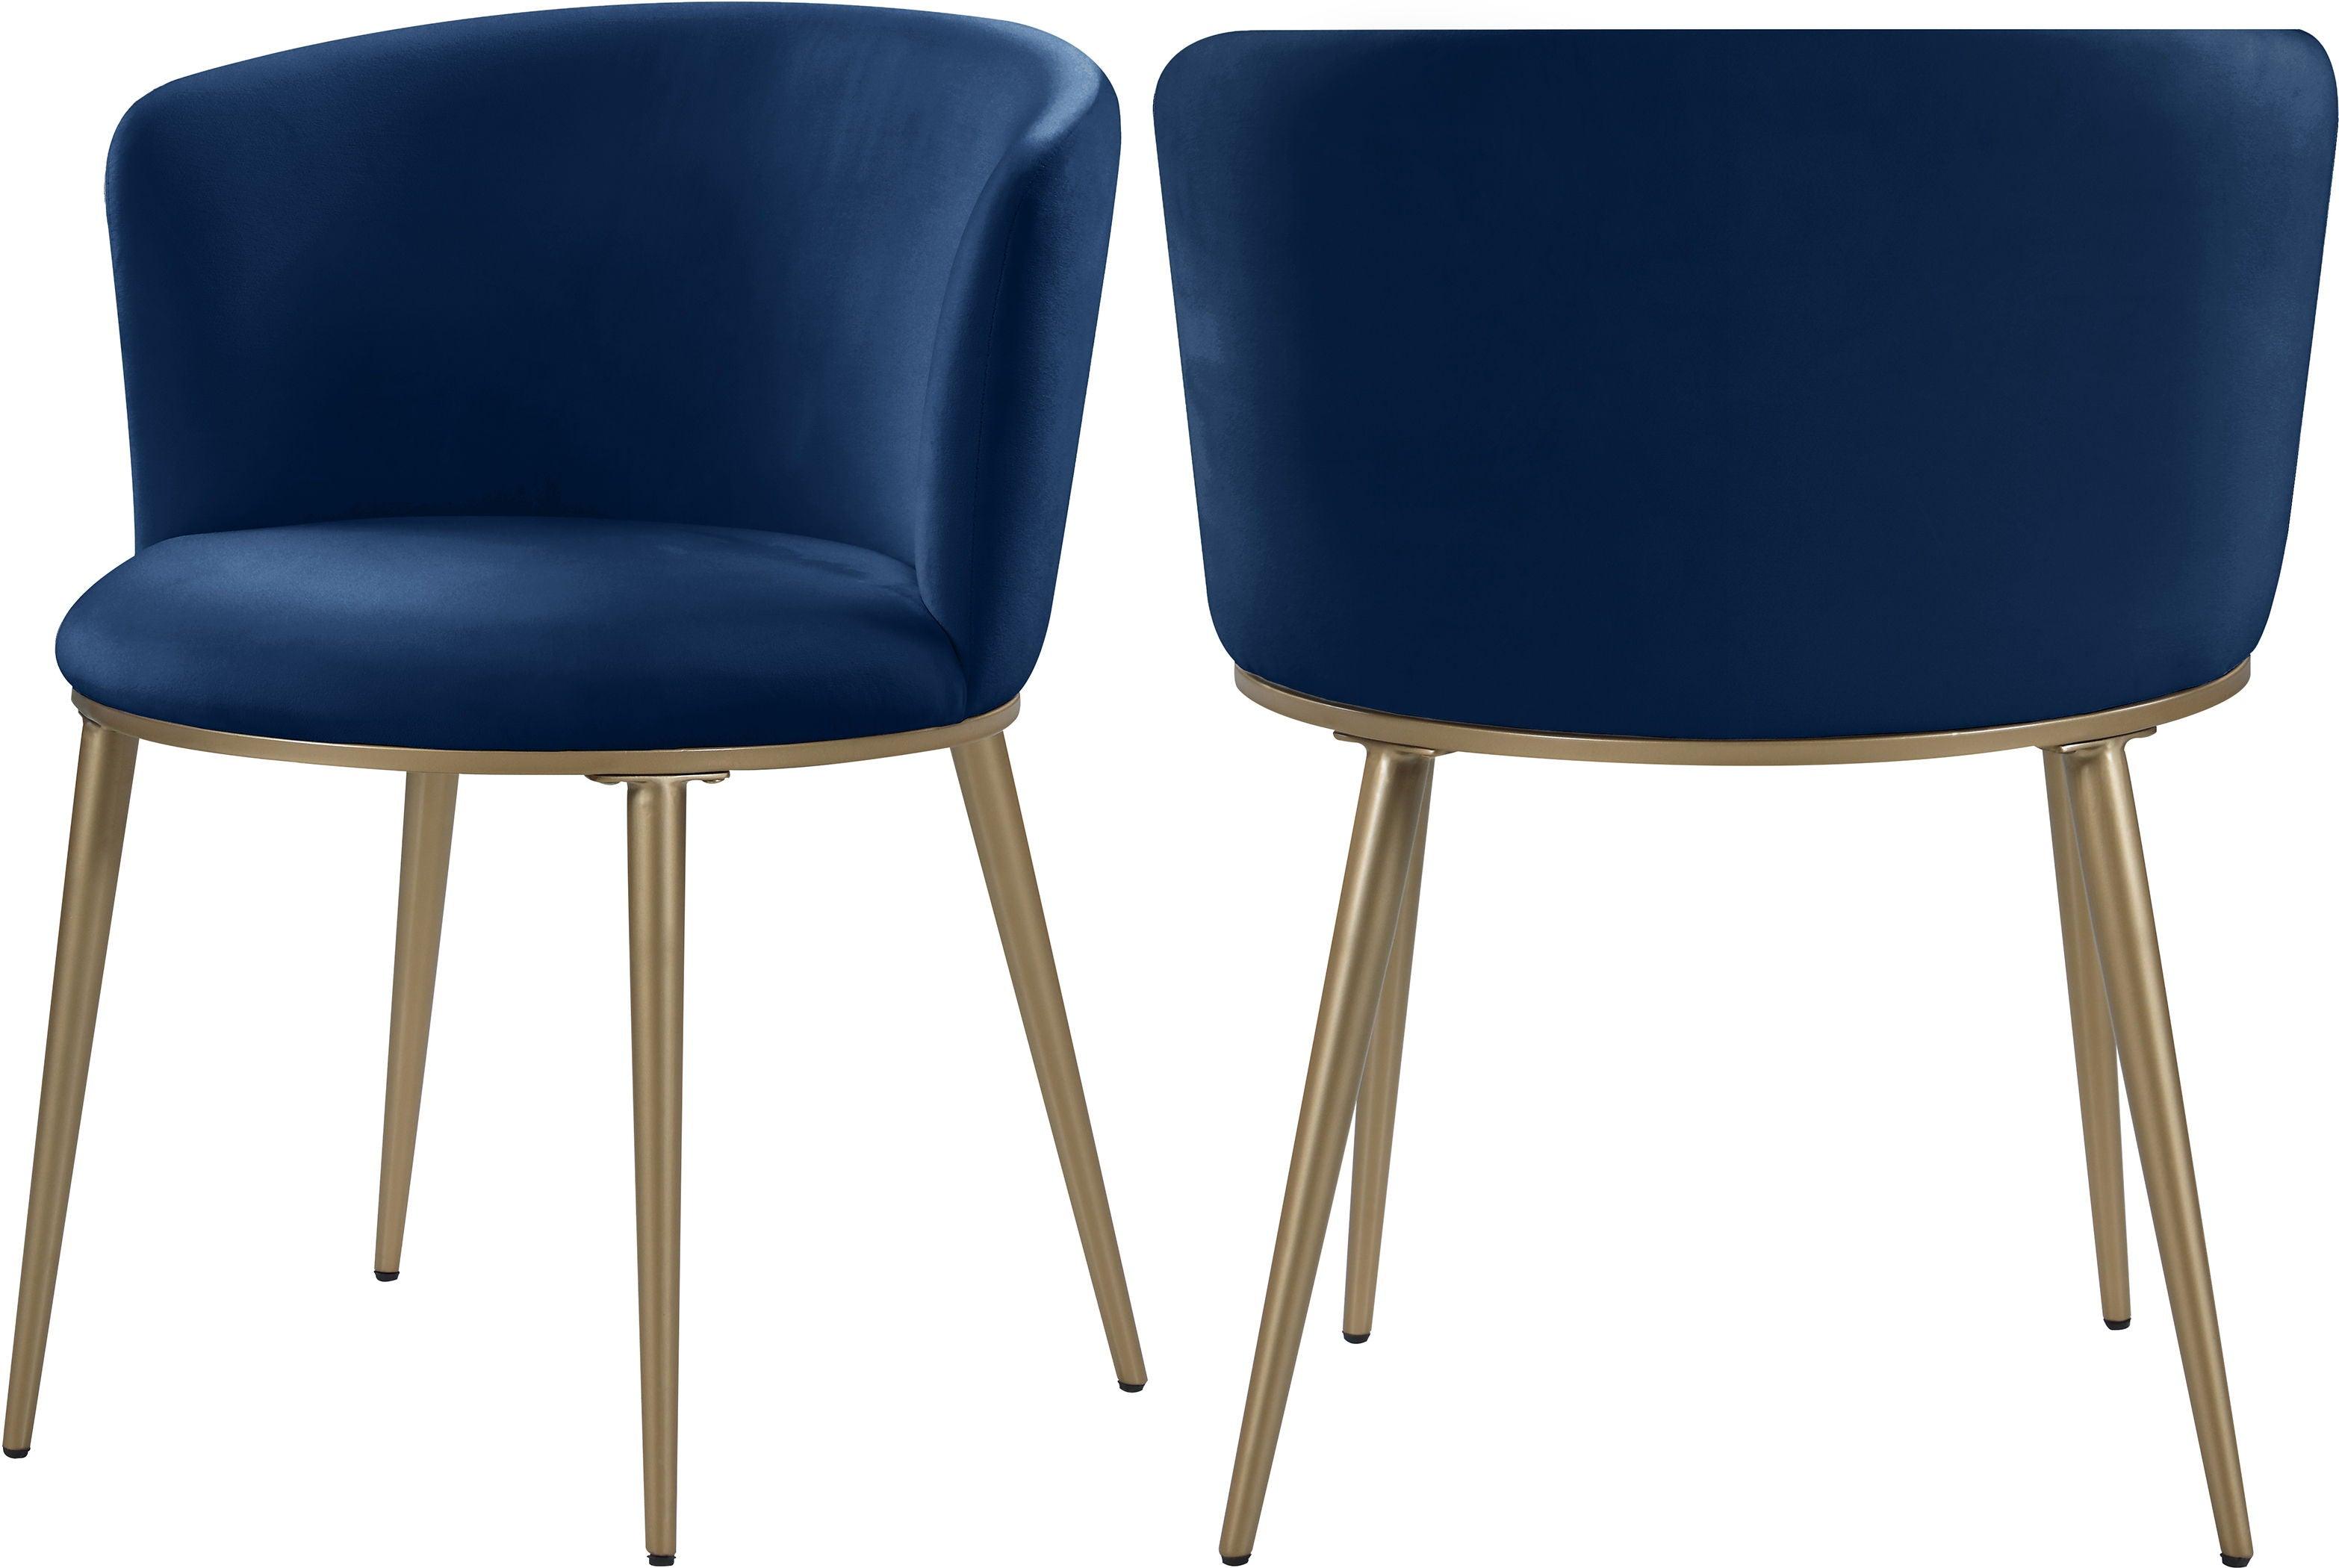 Meridian Furniture - Skylar - Dining Chair with Gold Legs (Set of 2) - 5th Avenue Furniture